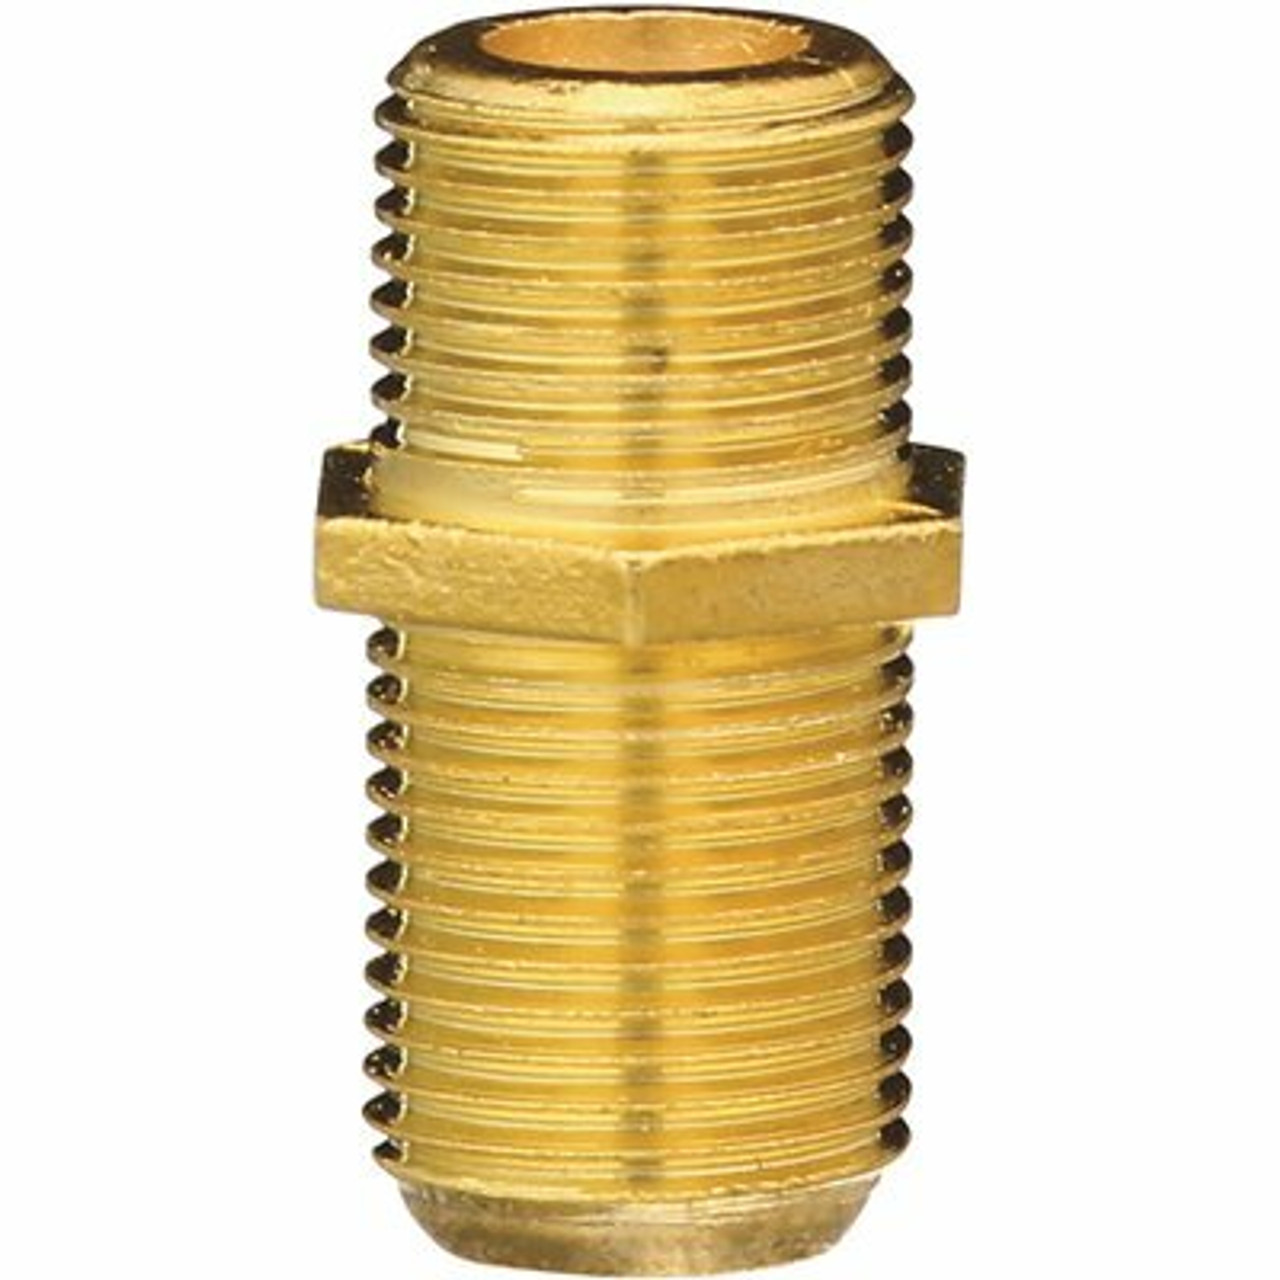 Zenith Feed Through Connectors In Gold (10-Pack)